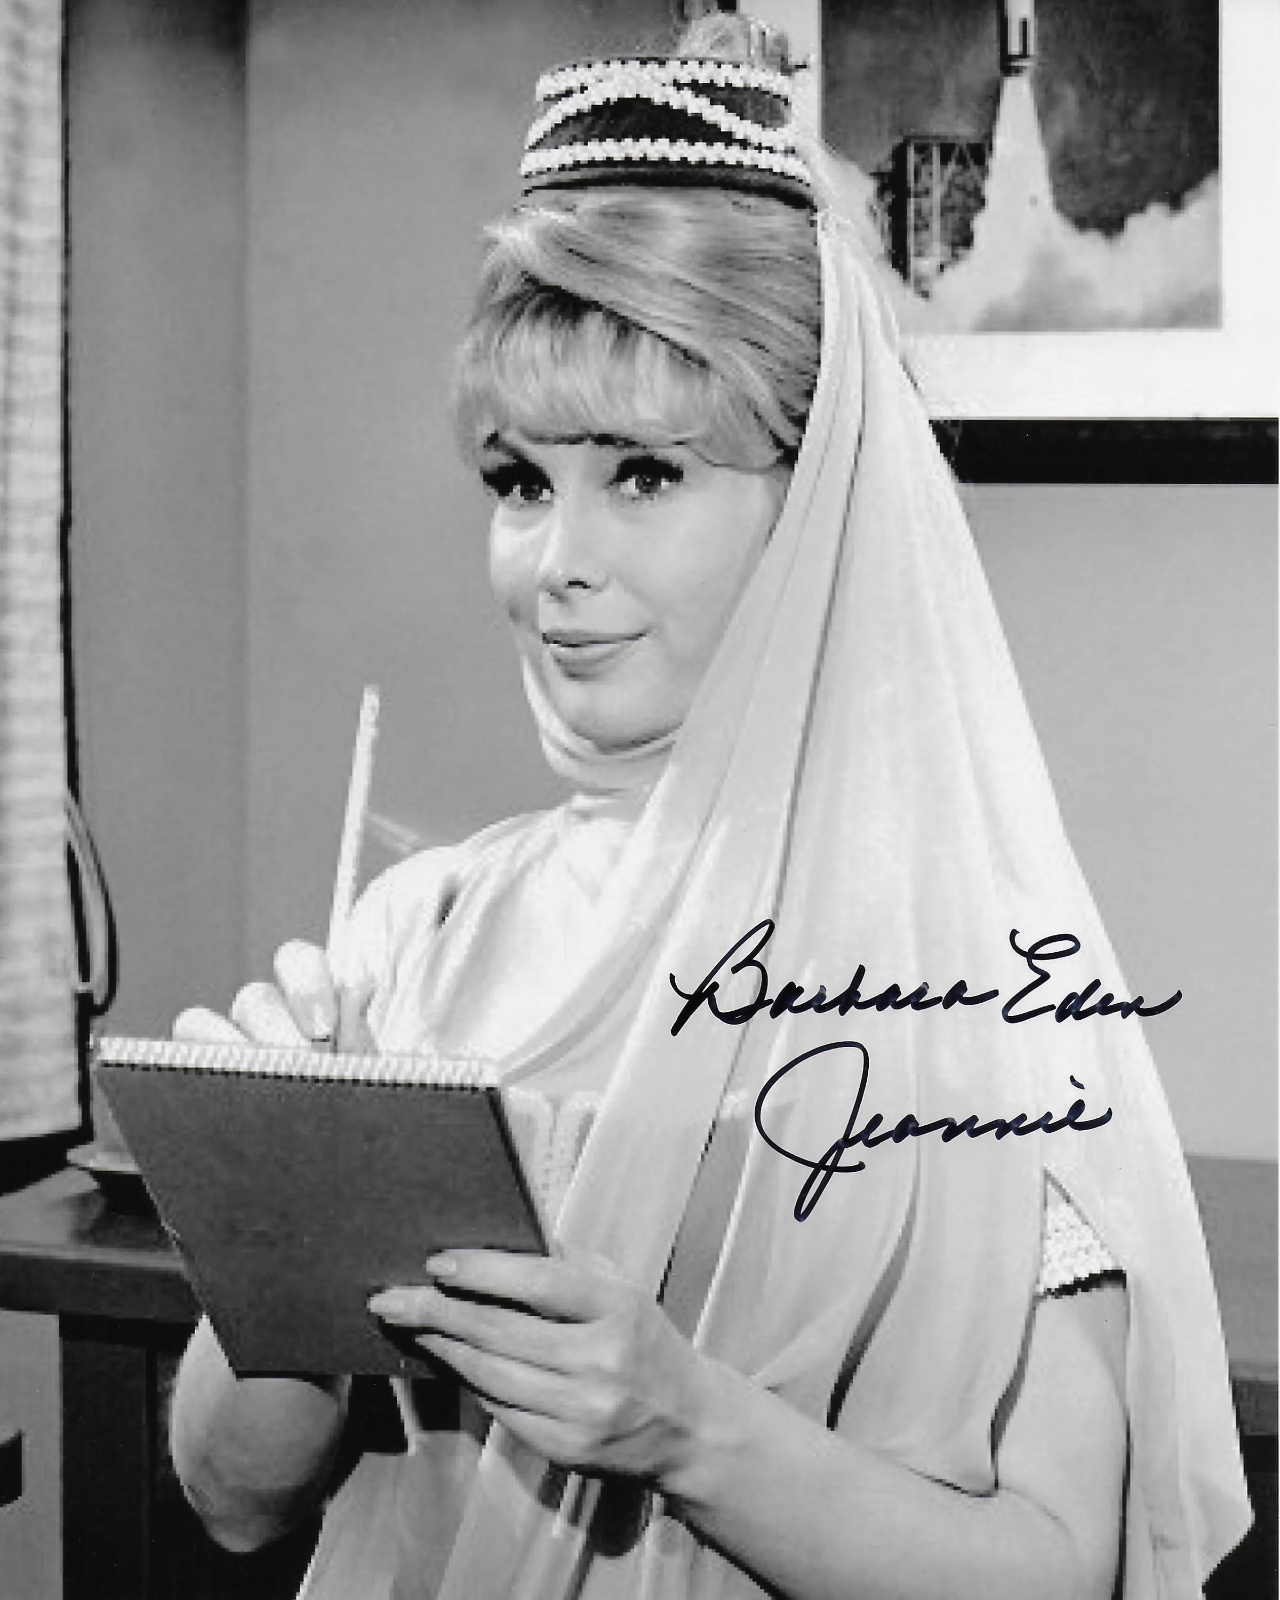 Barbara Eden I Dream of Jeannie 8x10 Photo Poster painting #32 signed at The Hollywood Show